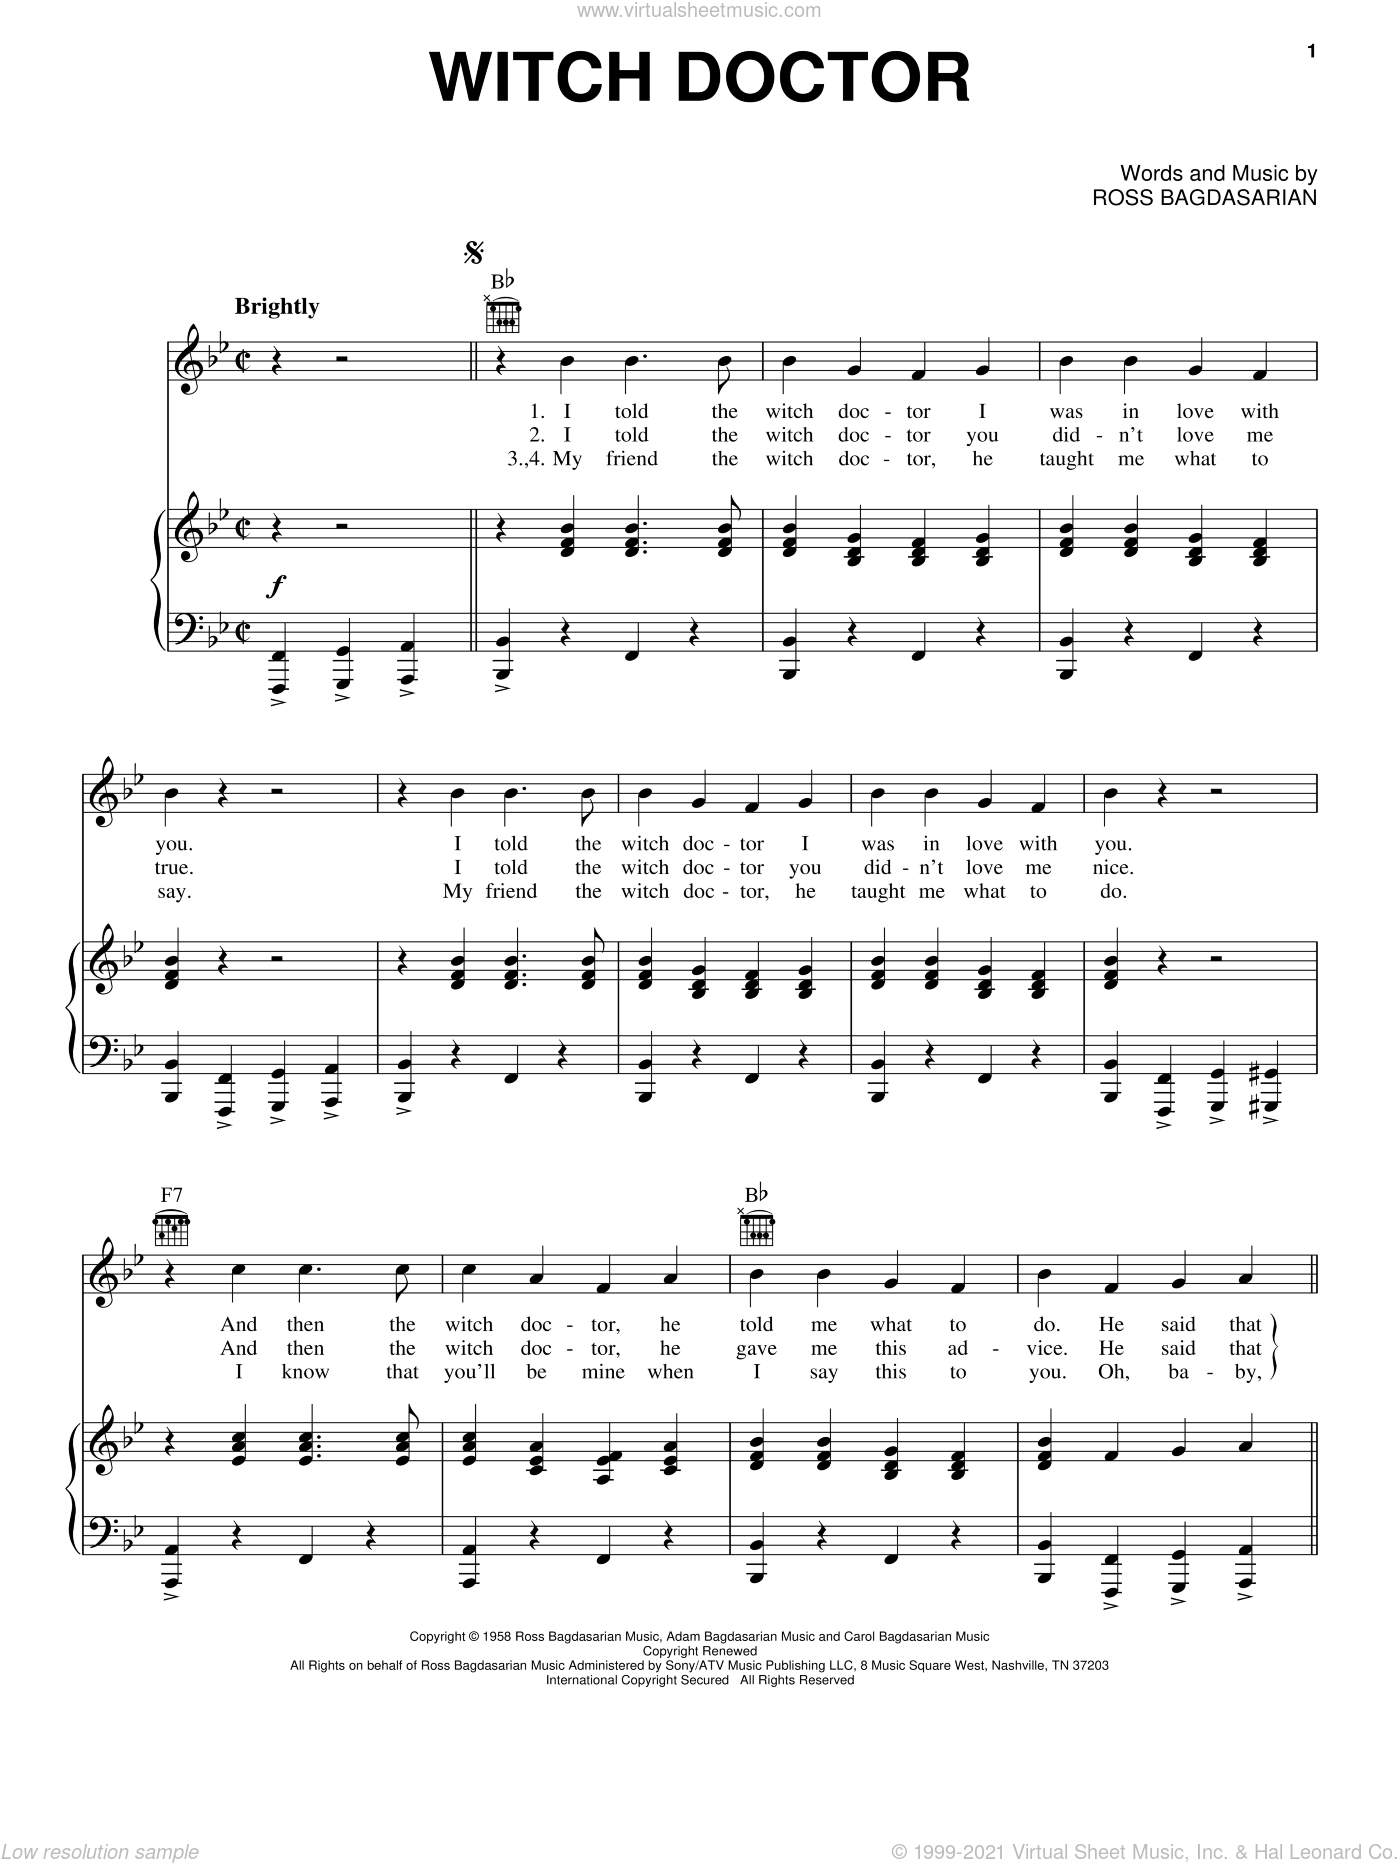 Chipmunks - Witch Doctor sheet music for voice, piano or guitar v2